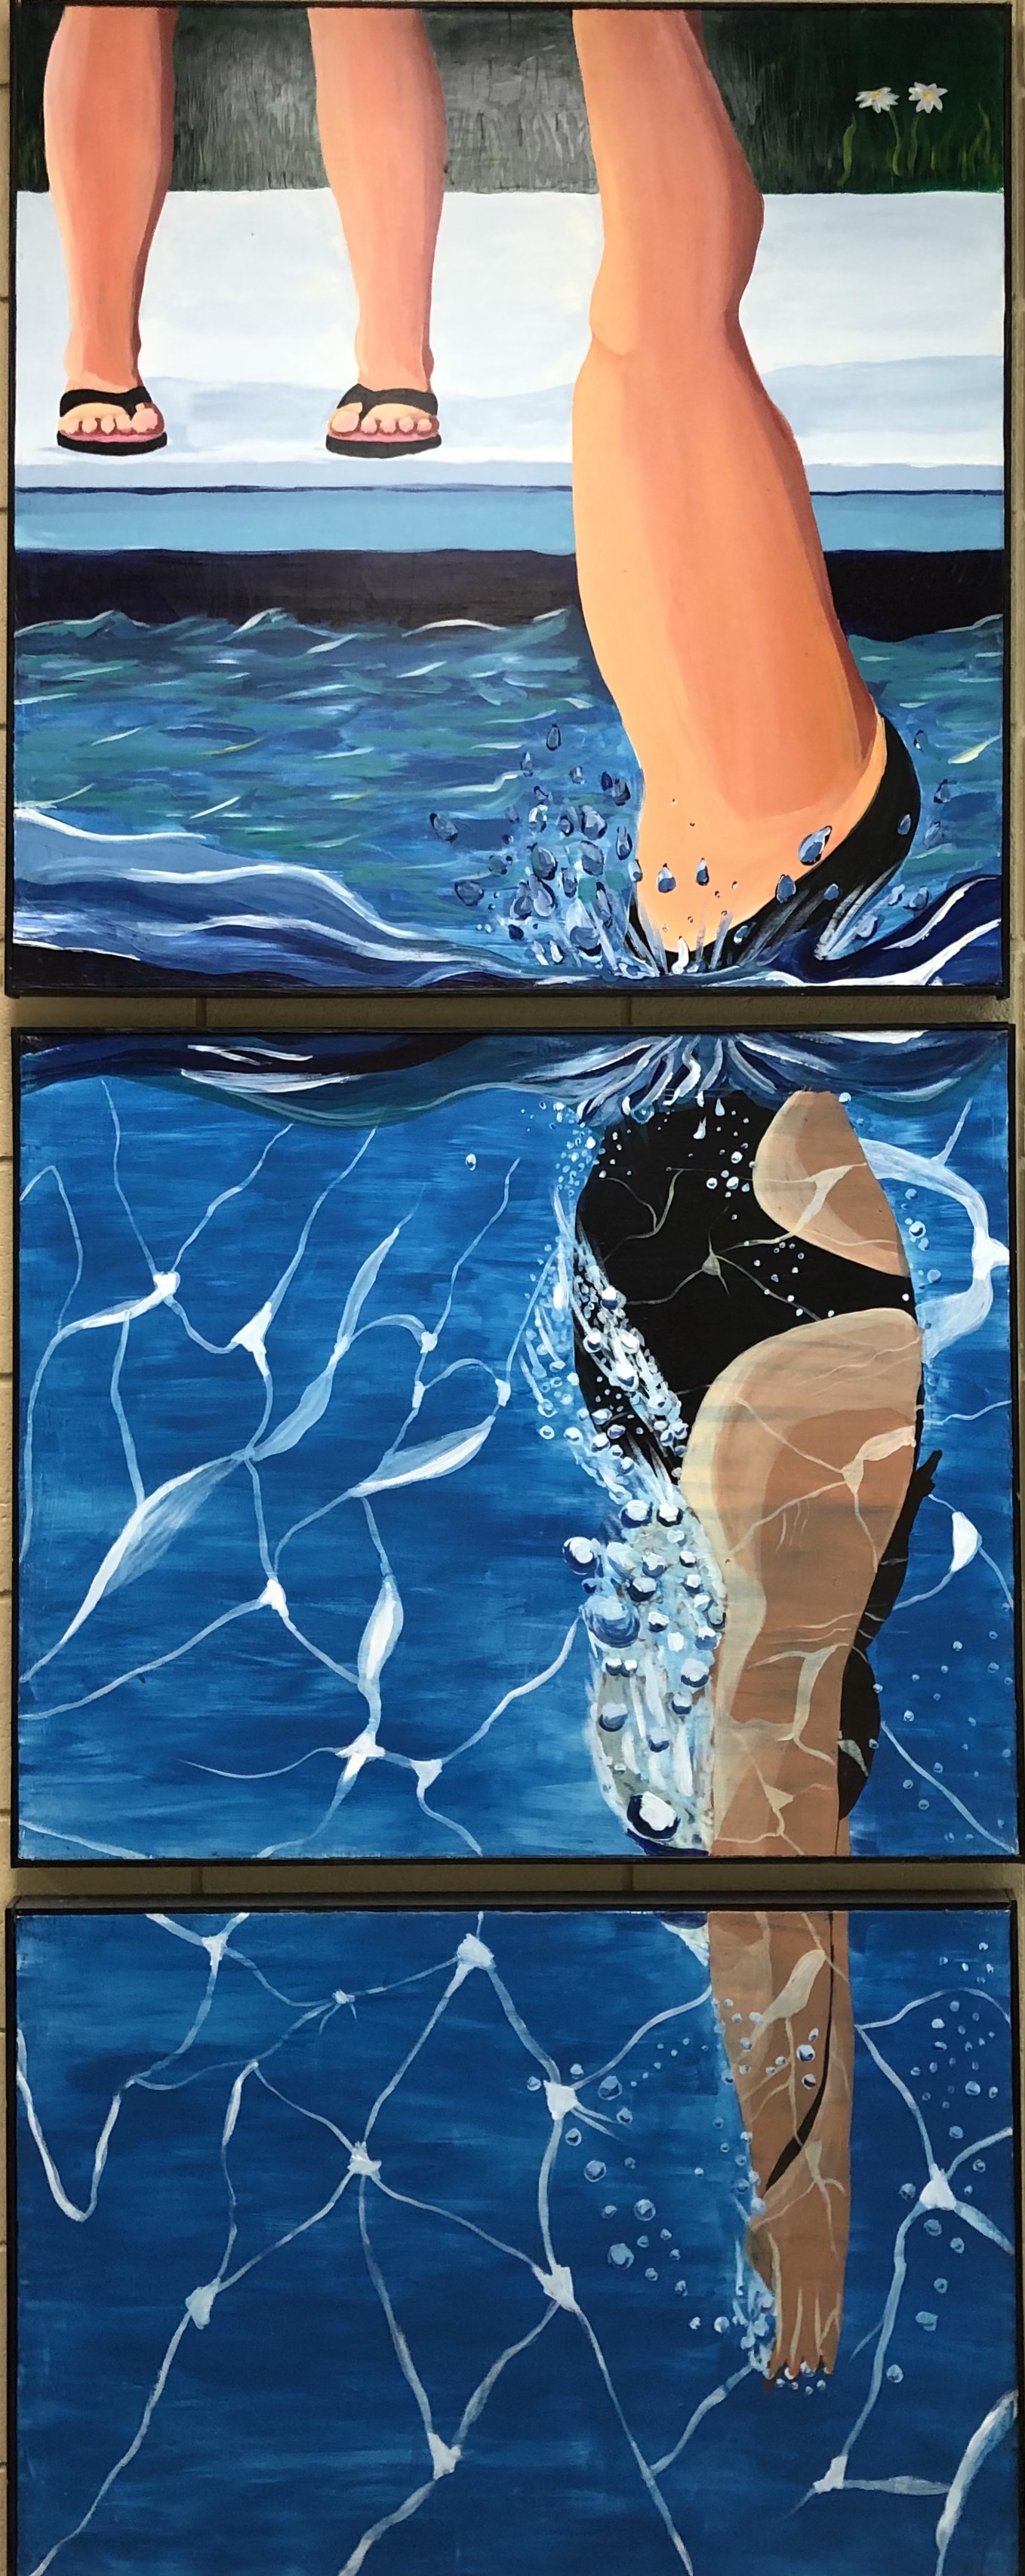 This is a vertical three panel painting of a diver jumping into the water.